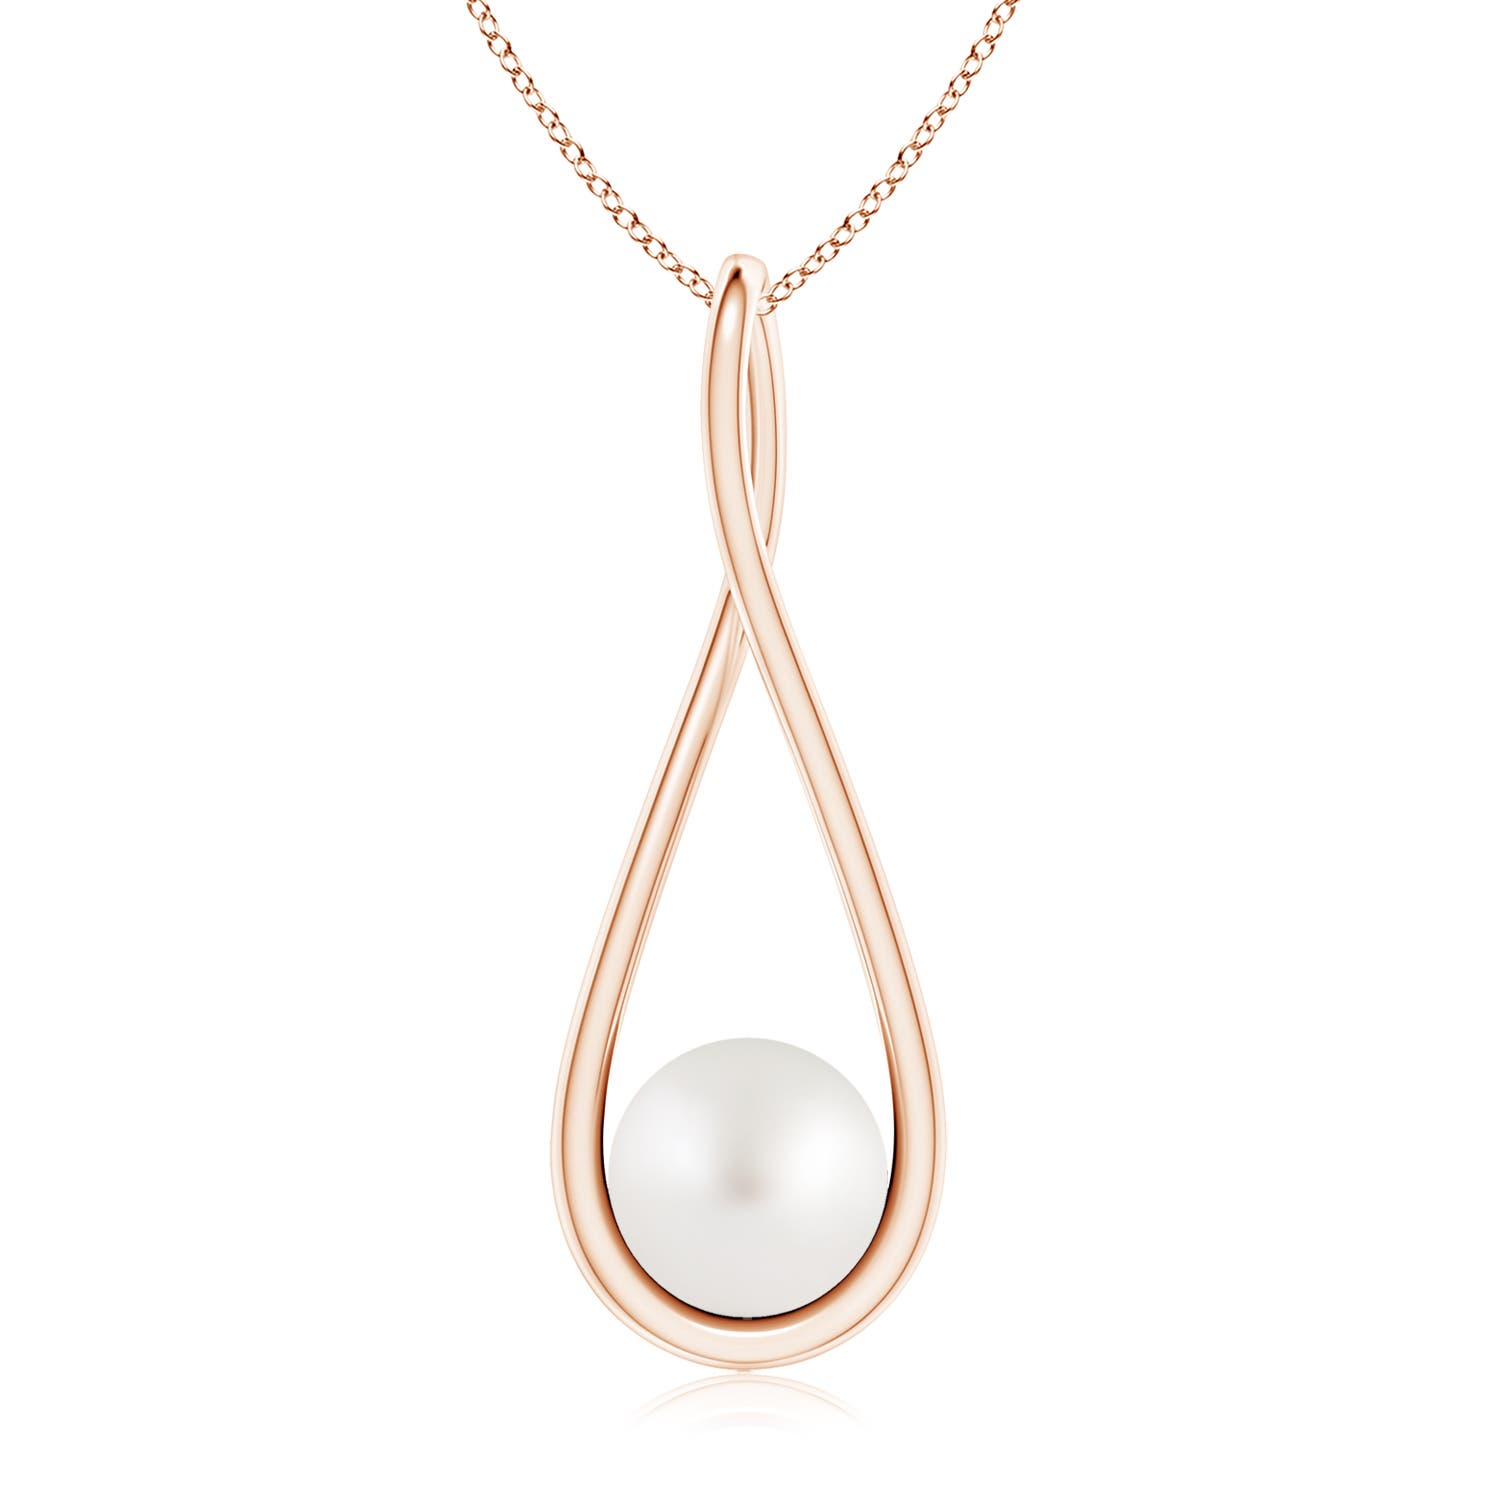 AA - South Sea Cultured Pearl / 3.7 CT / 14 KT Rose Gold